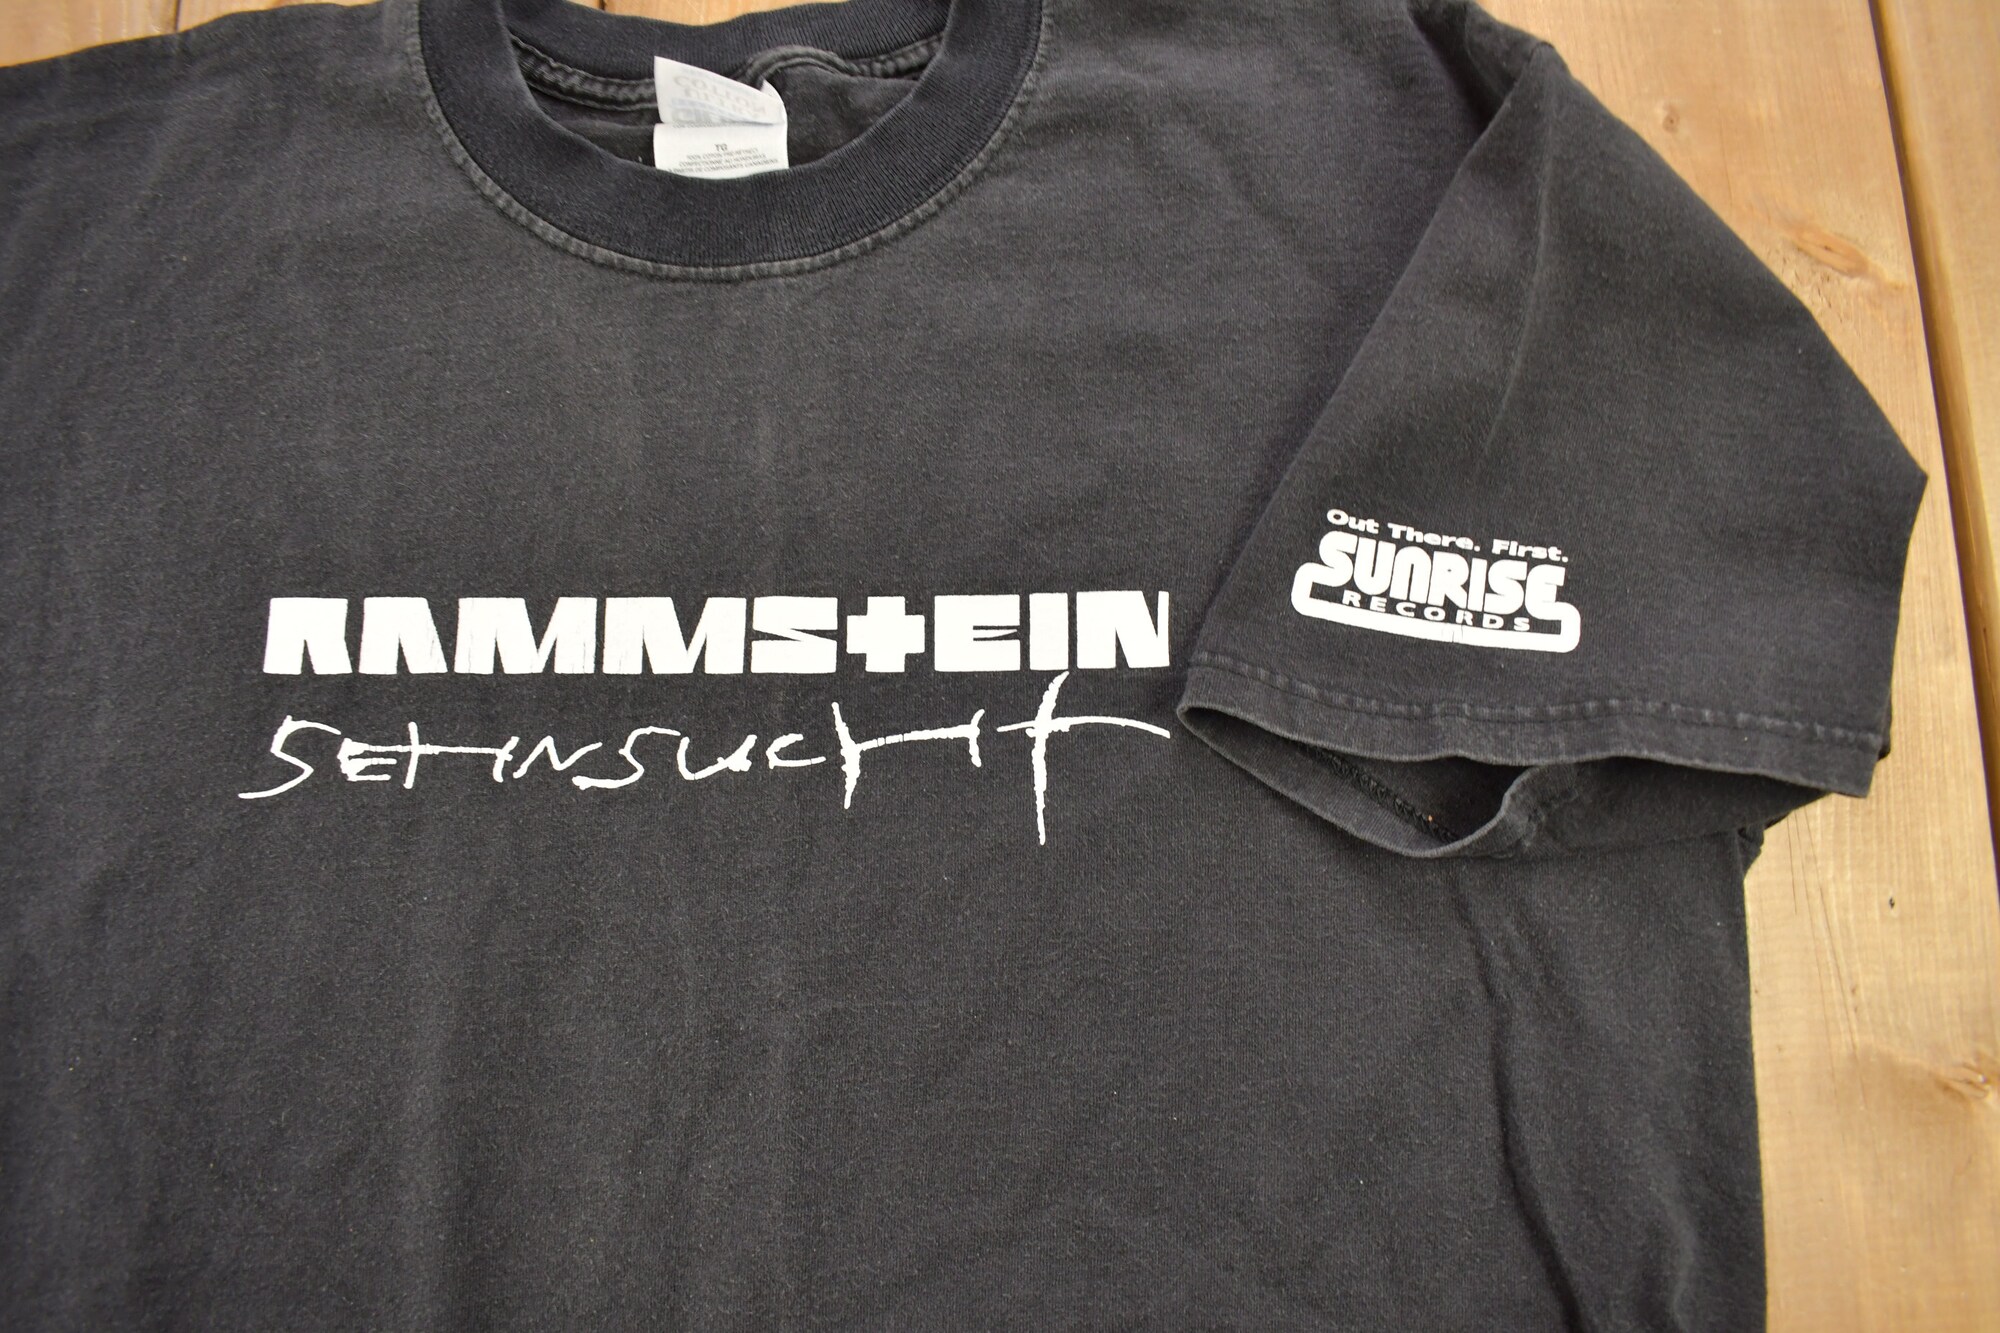 Discover Vintage 1997 Rammstein Set In Sucht Band T-shirt / Band Tee / Sunrise Records / Music Promo / Premium Vintage